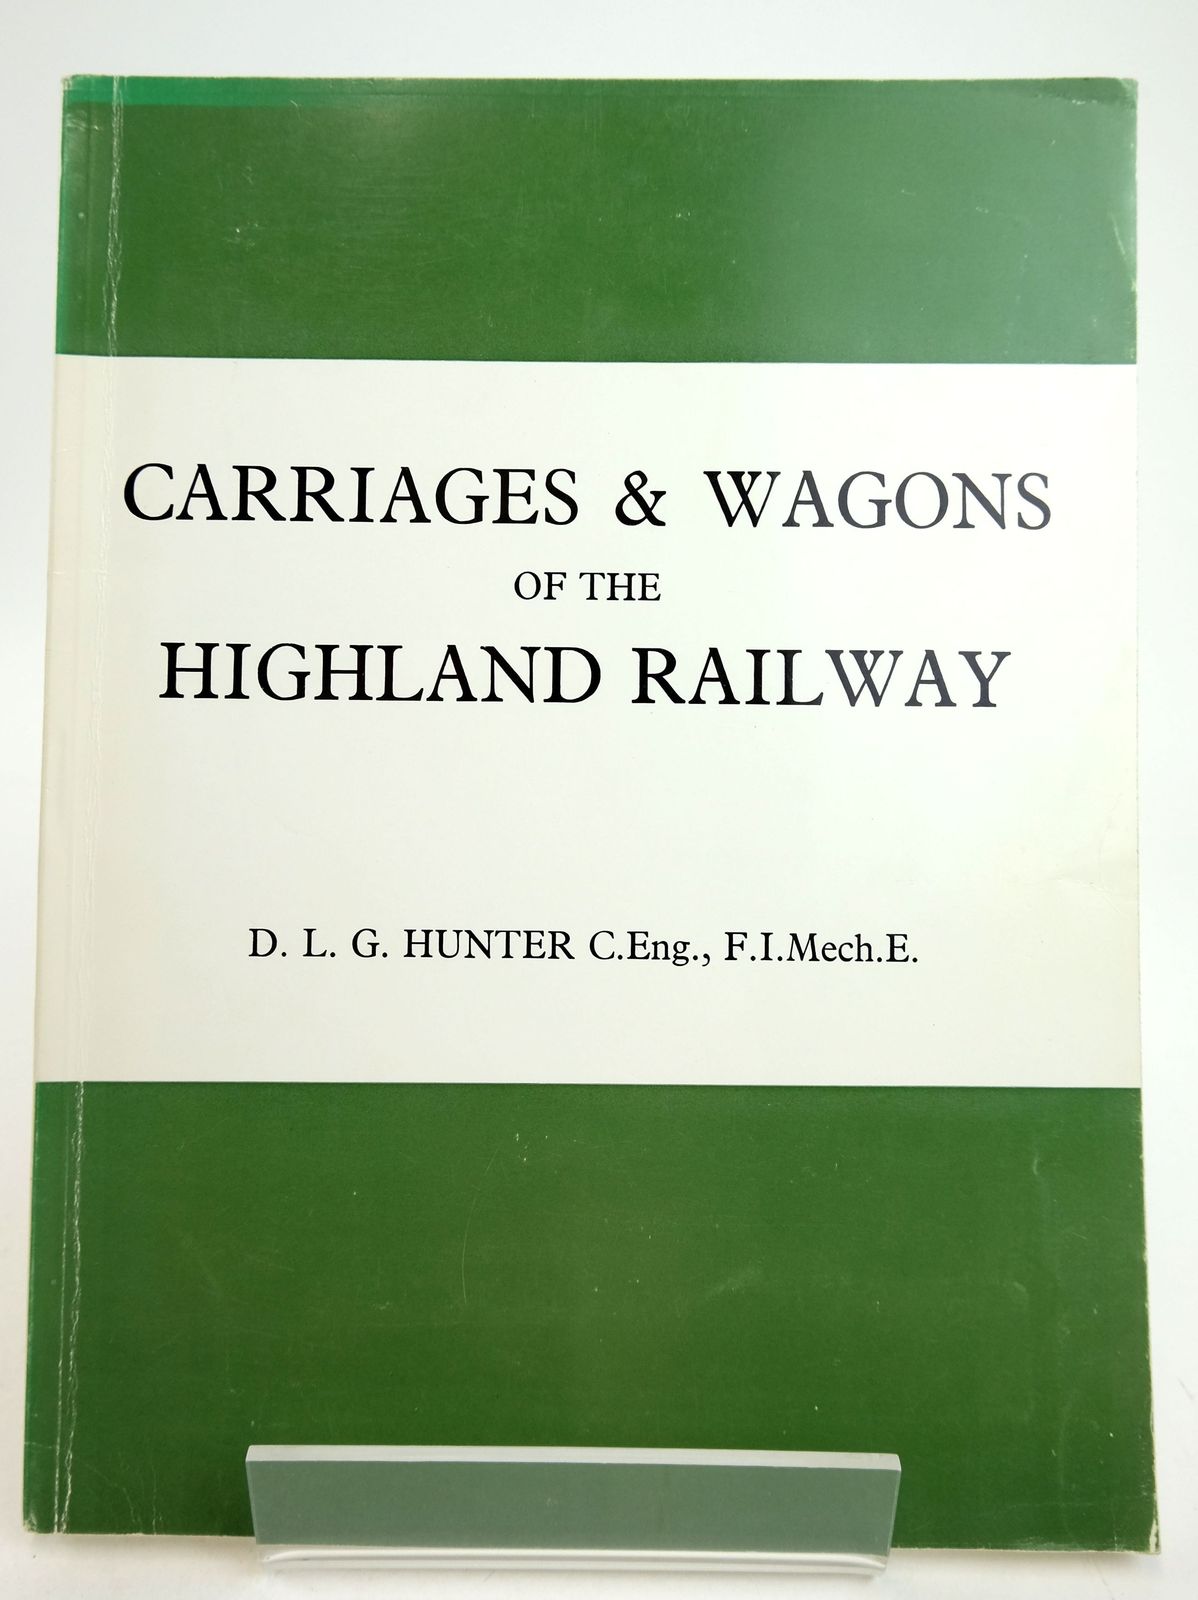 Carriages and Wagons of the Highland Railway